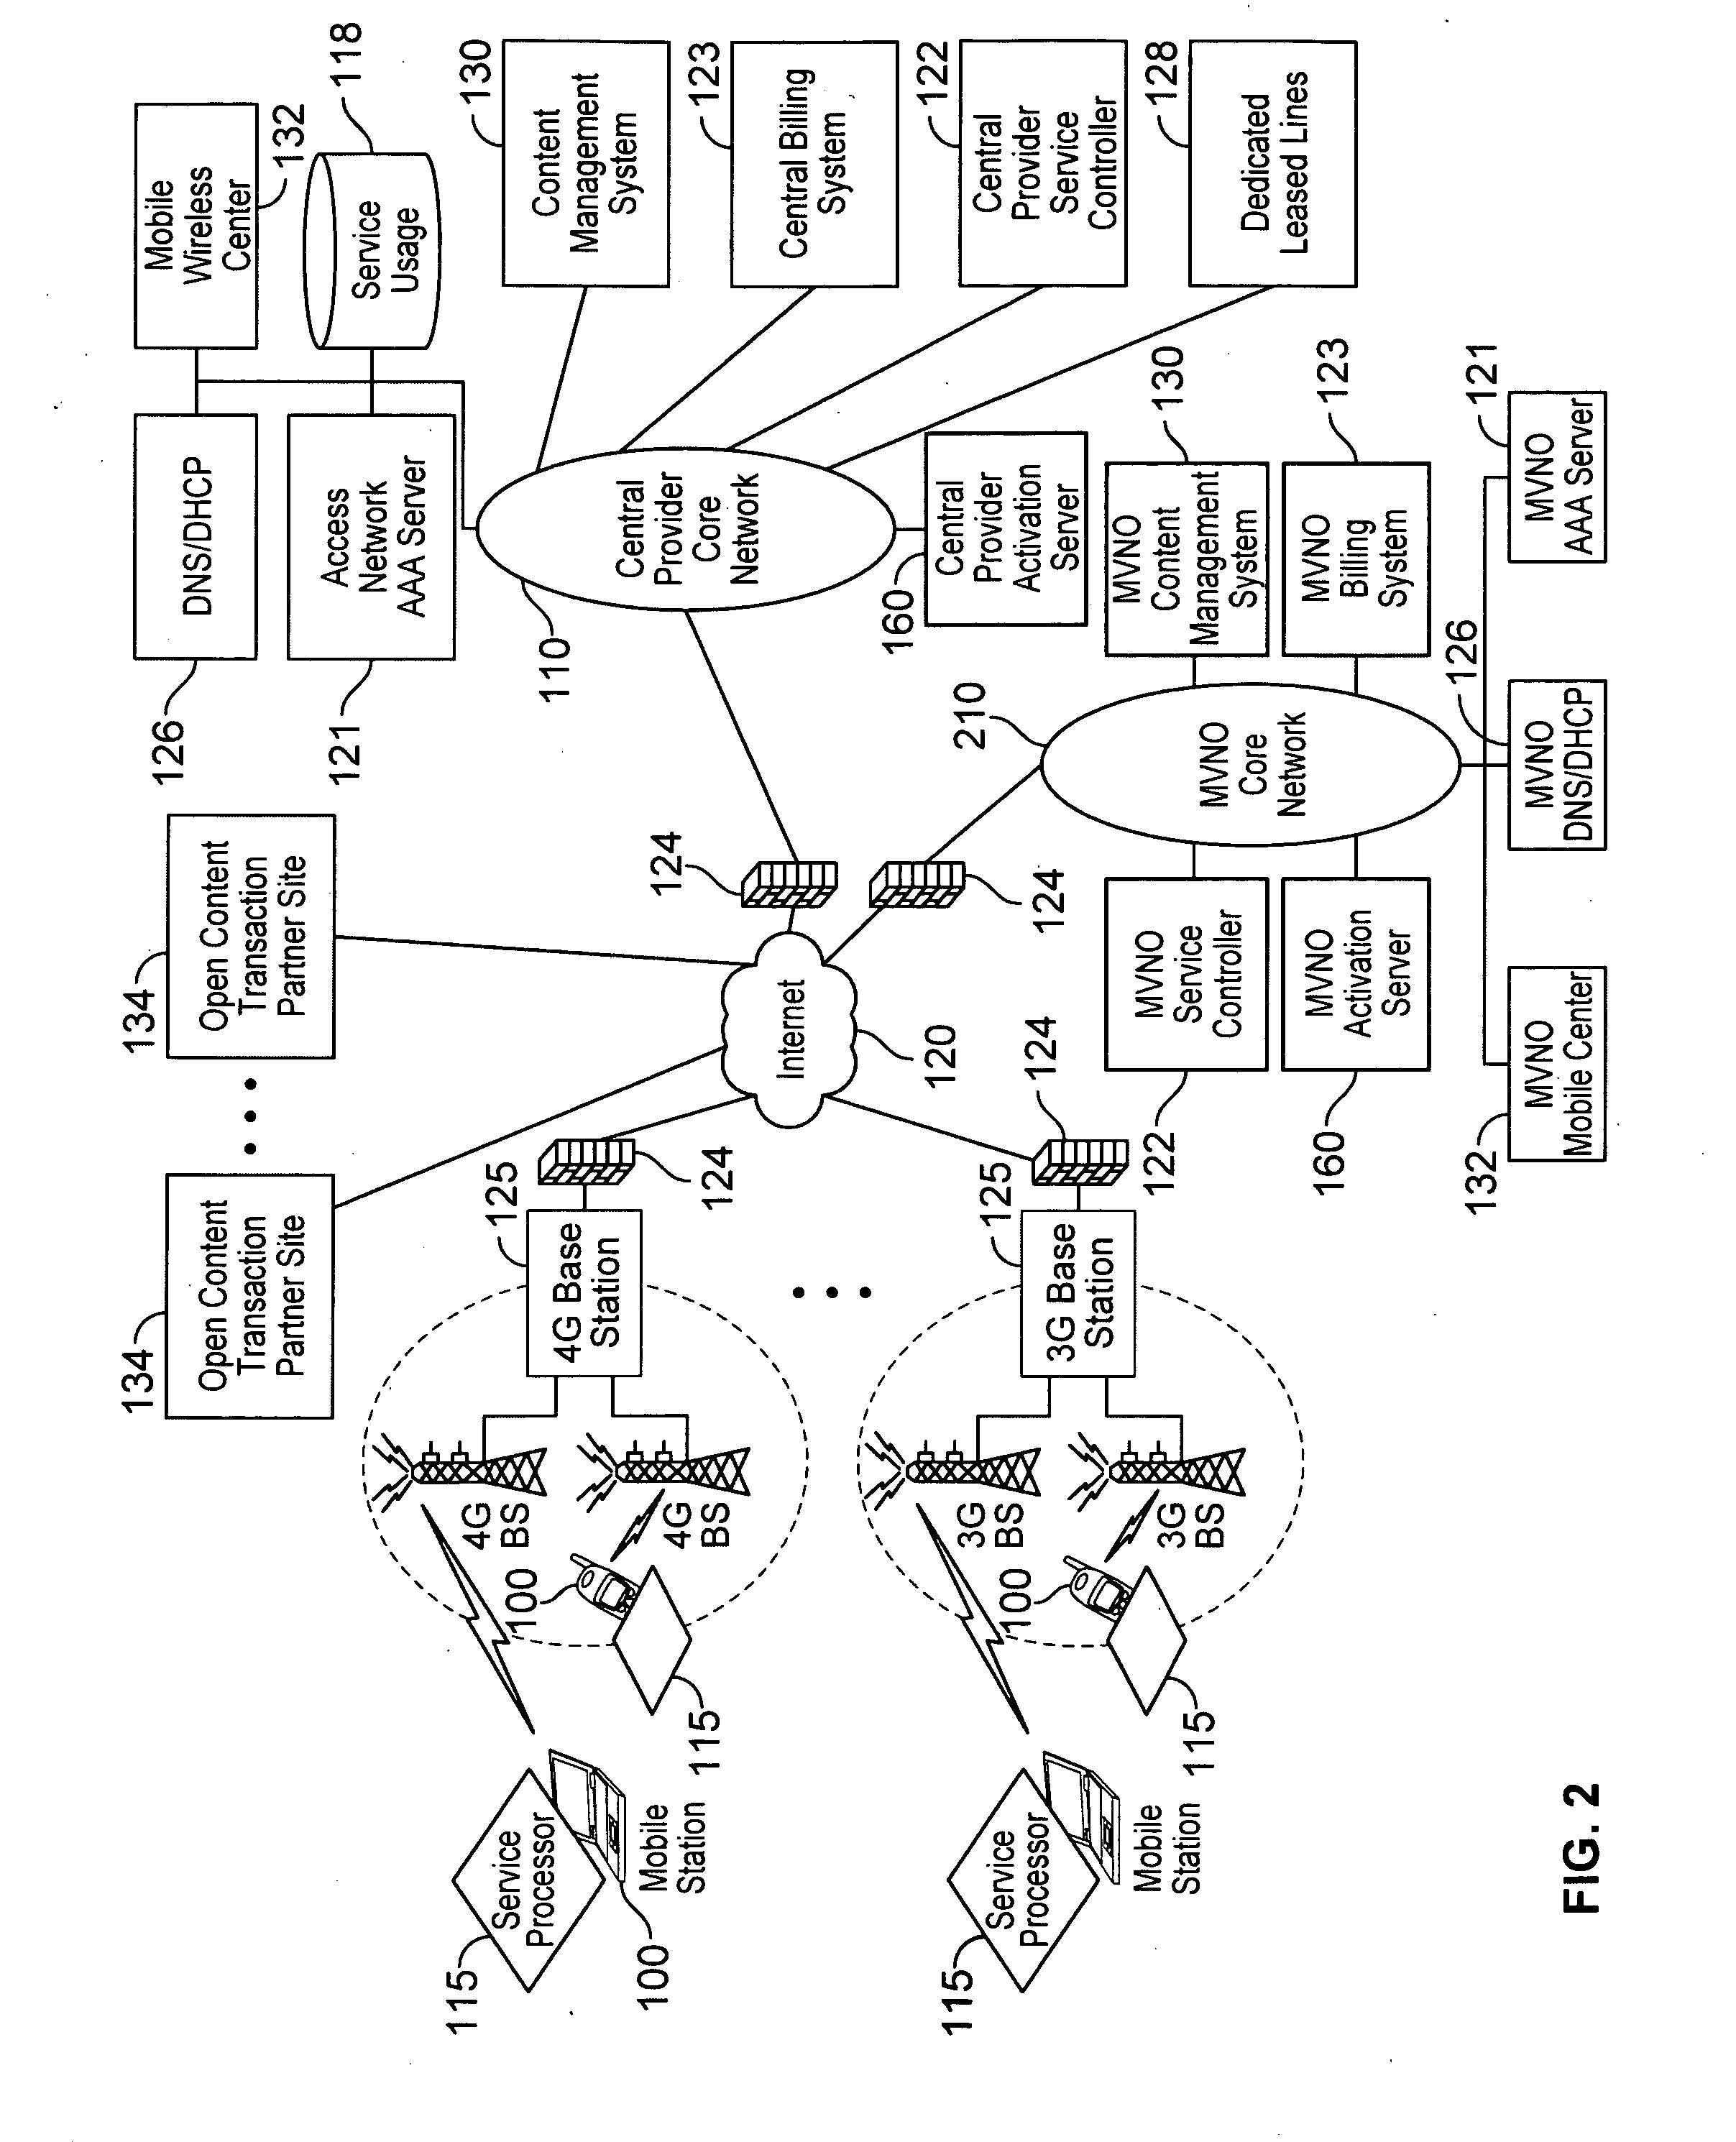 Device assisted ambient services